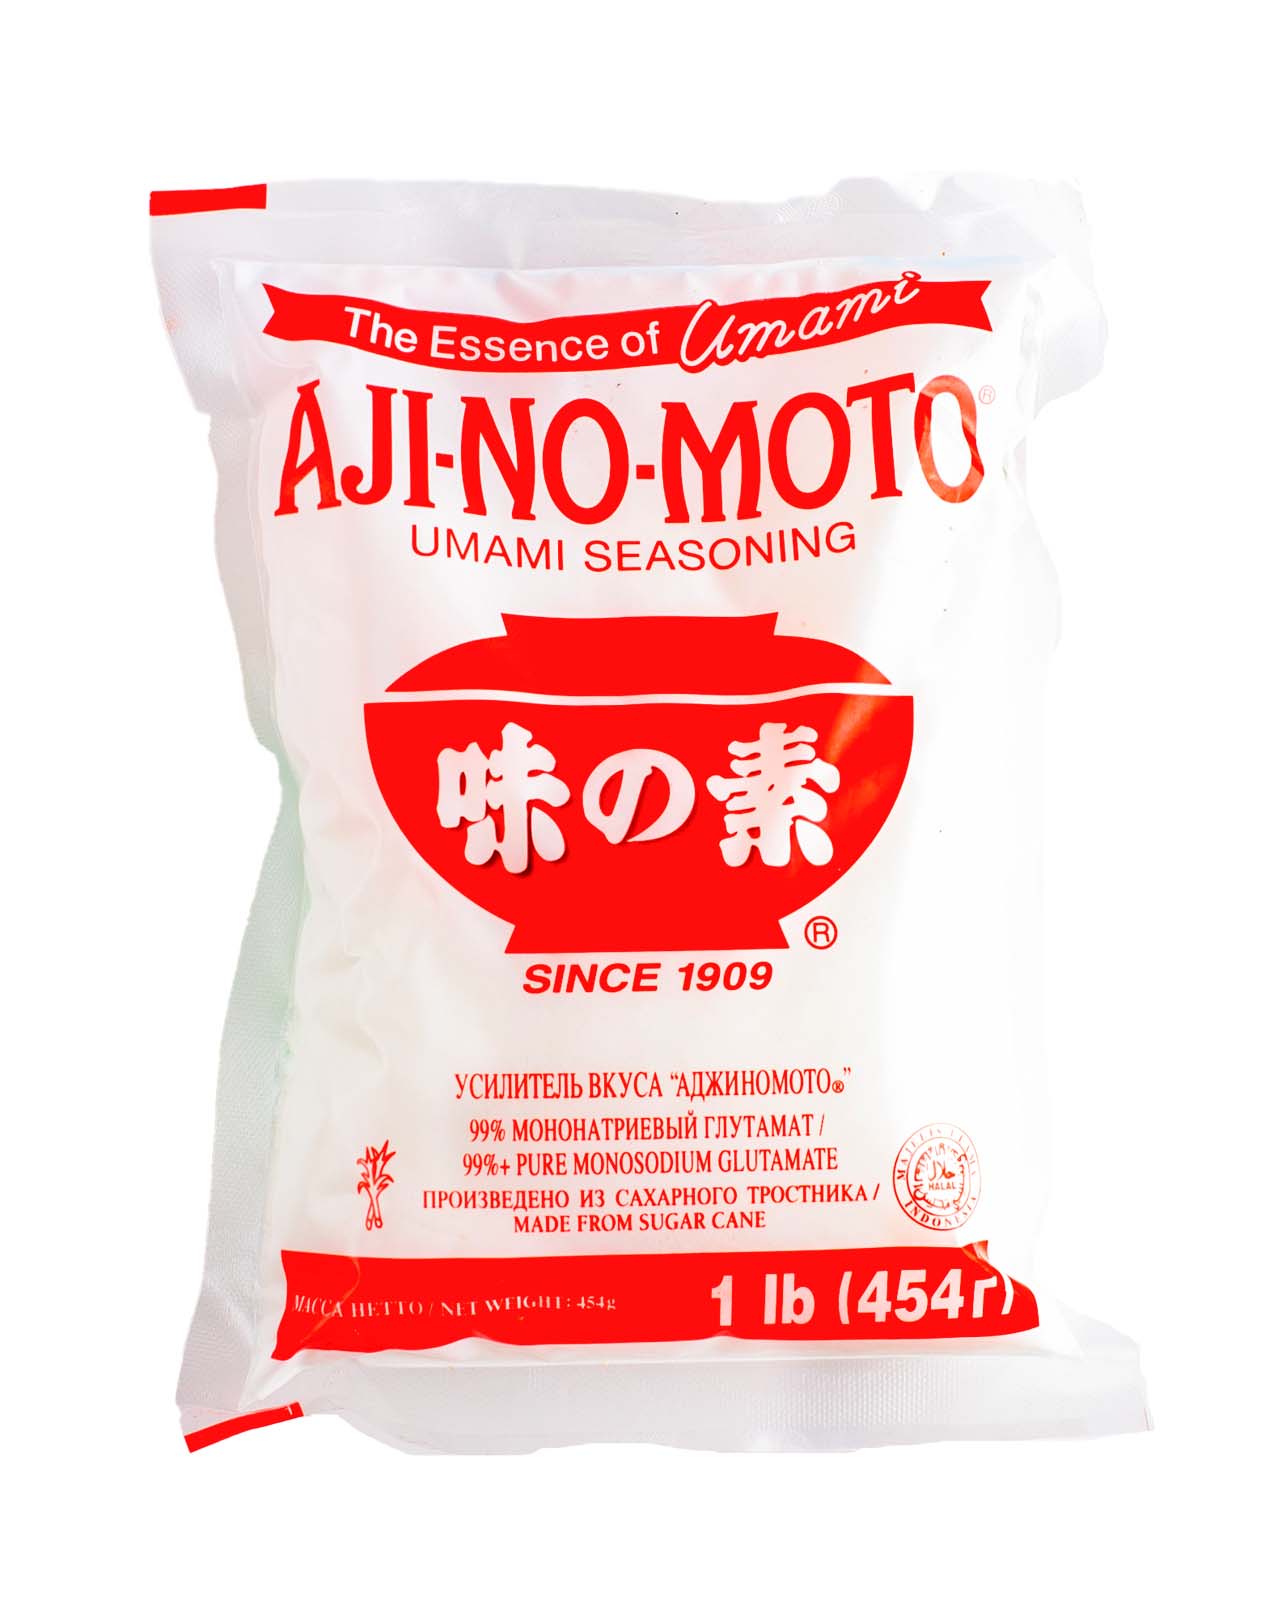 Monosodium glutamate Ajino Moto is also known as Japanese salt and is used as a flavoring agent.